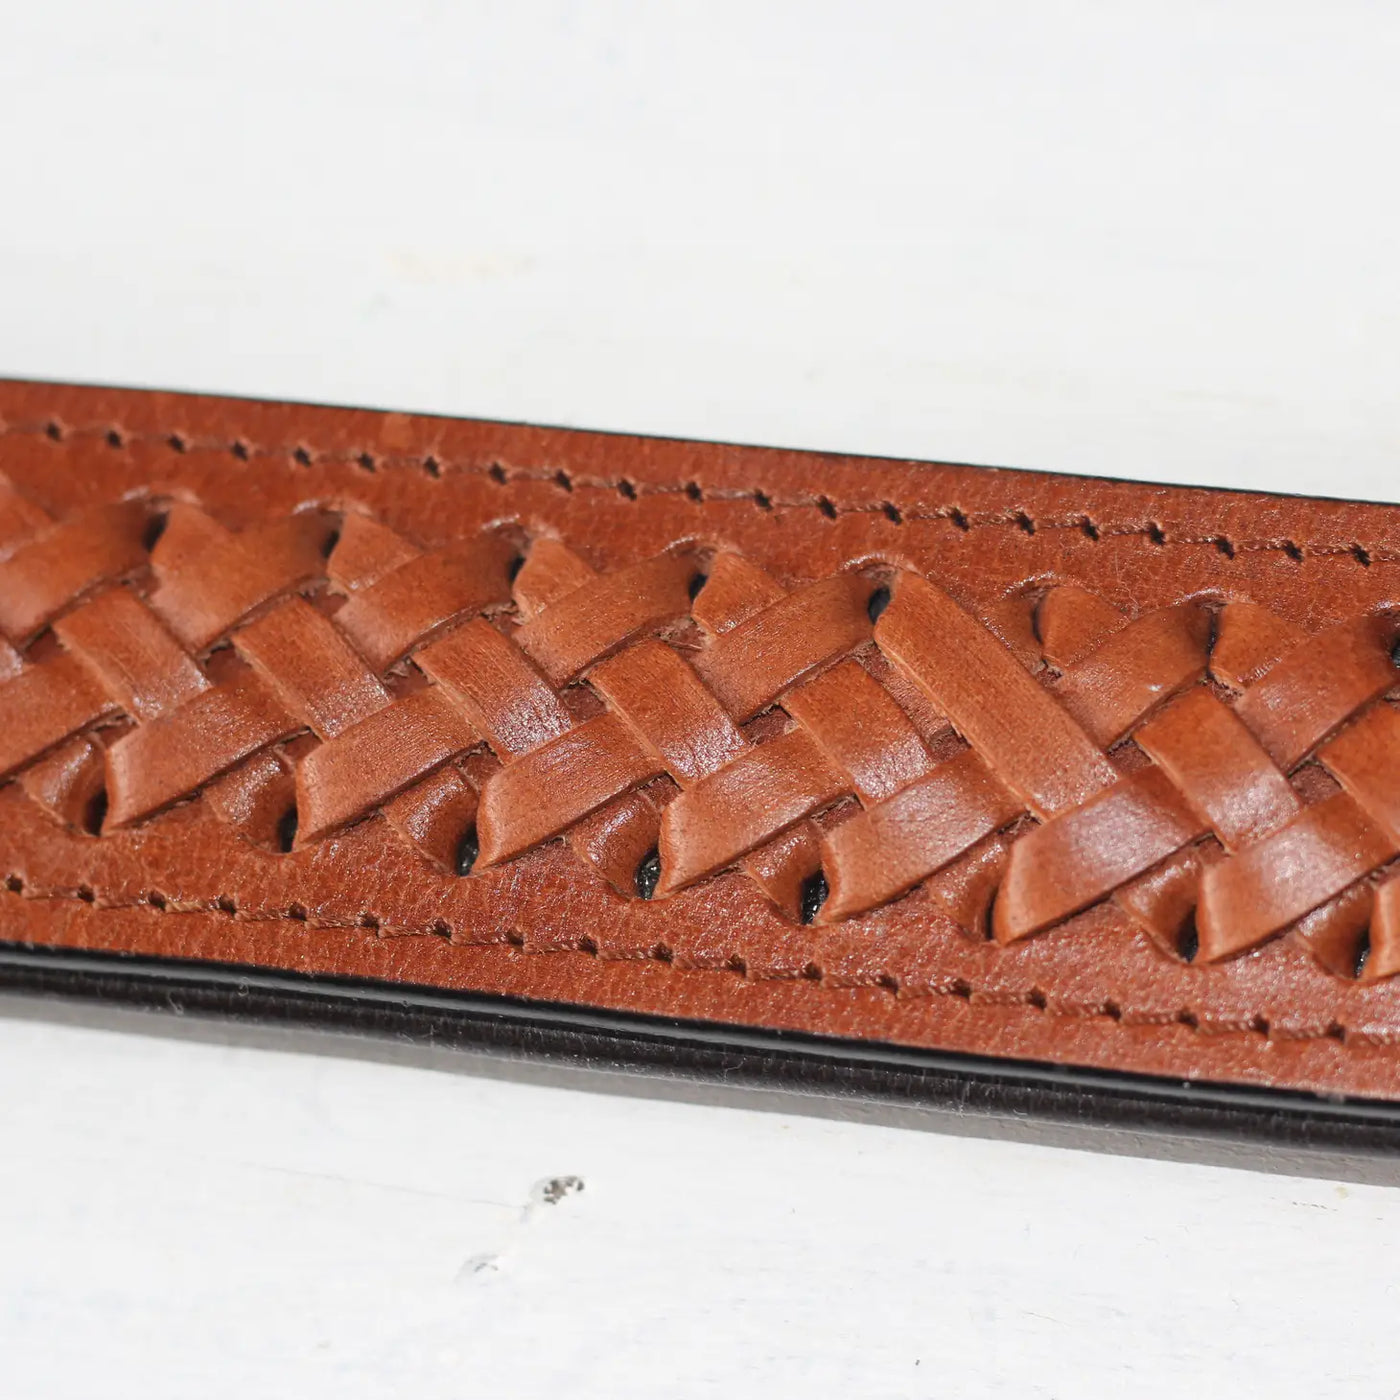 Twisted Cognac Leather Dog Collar